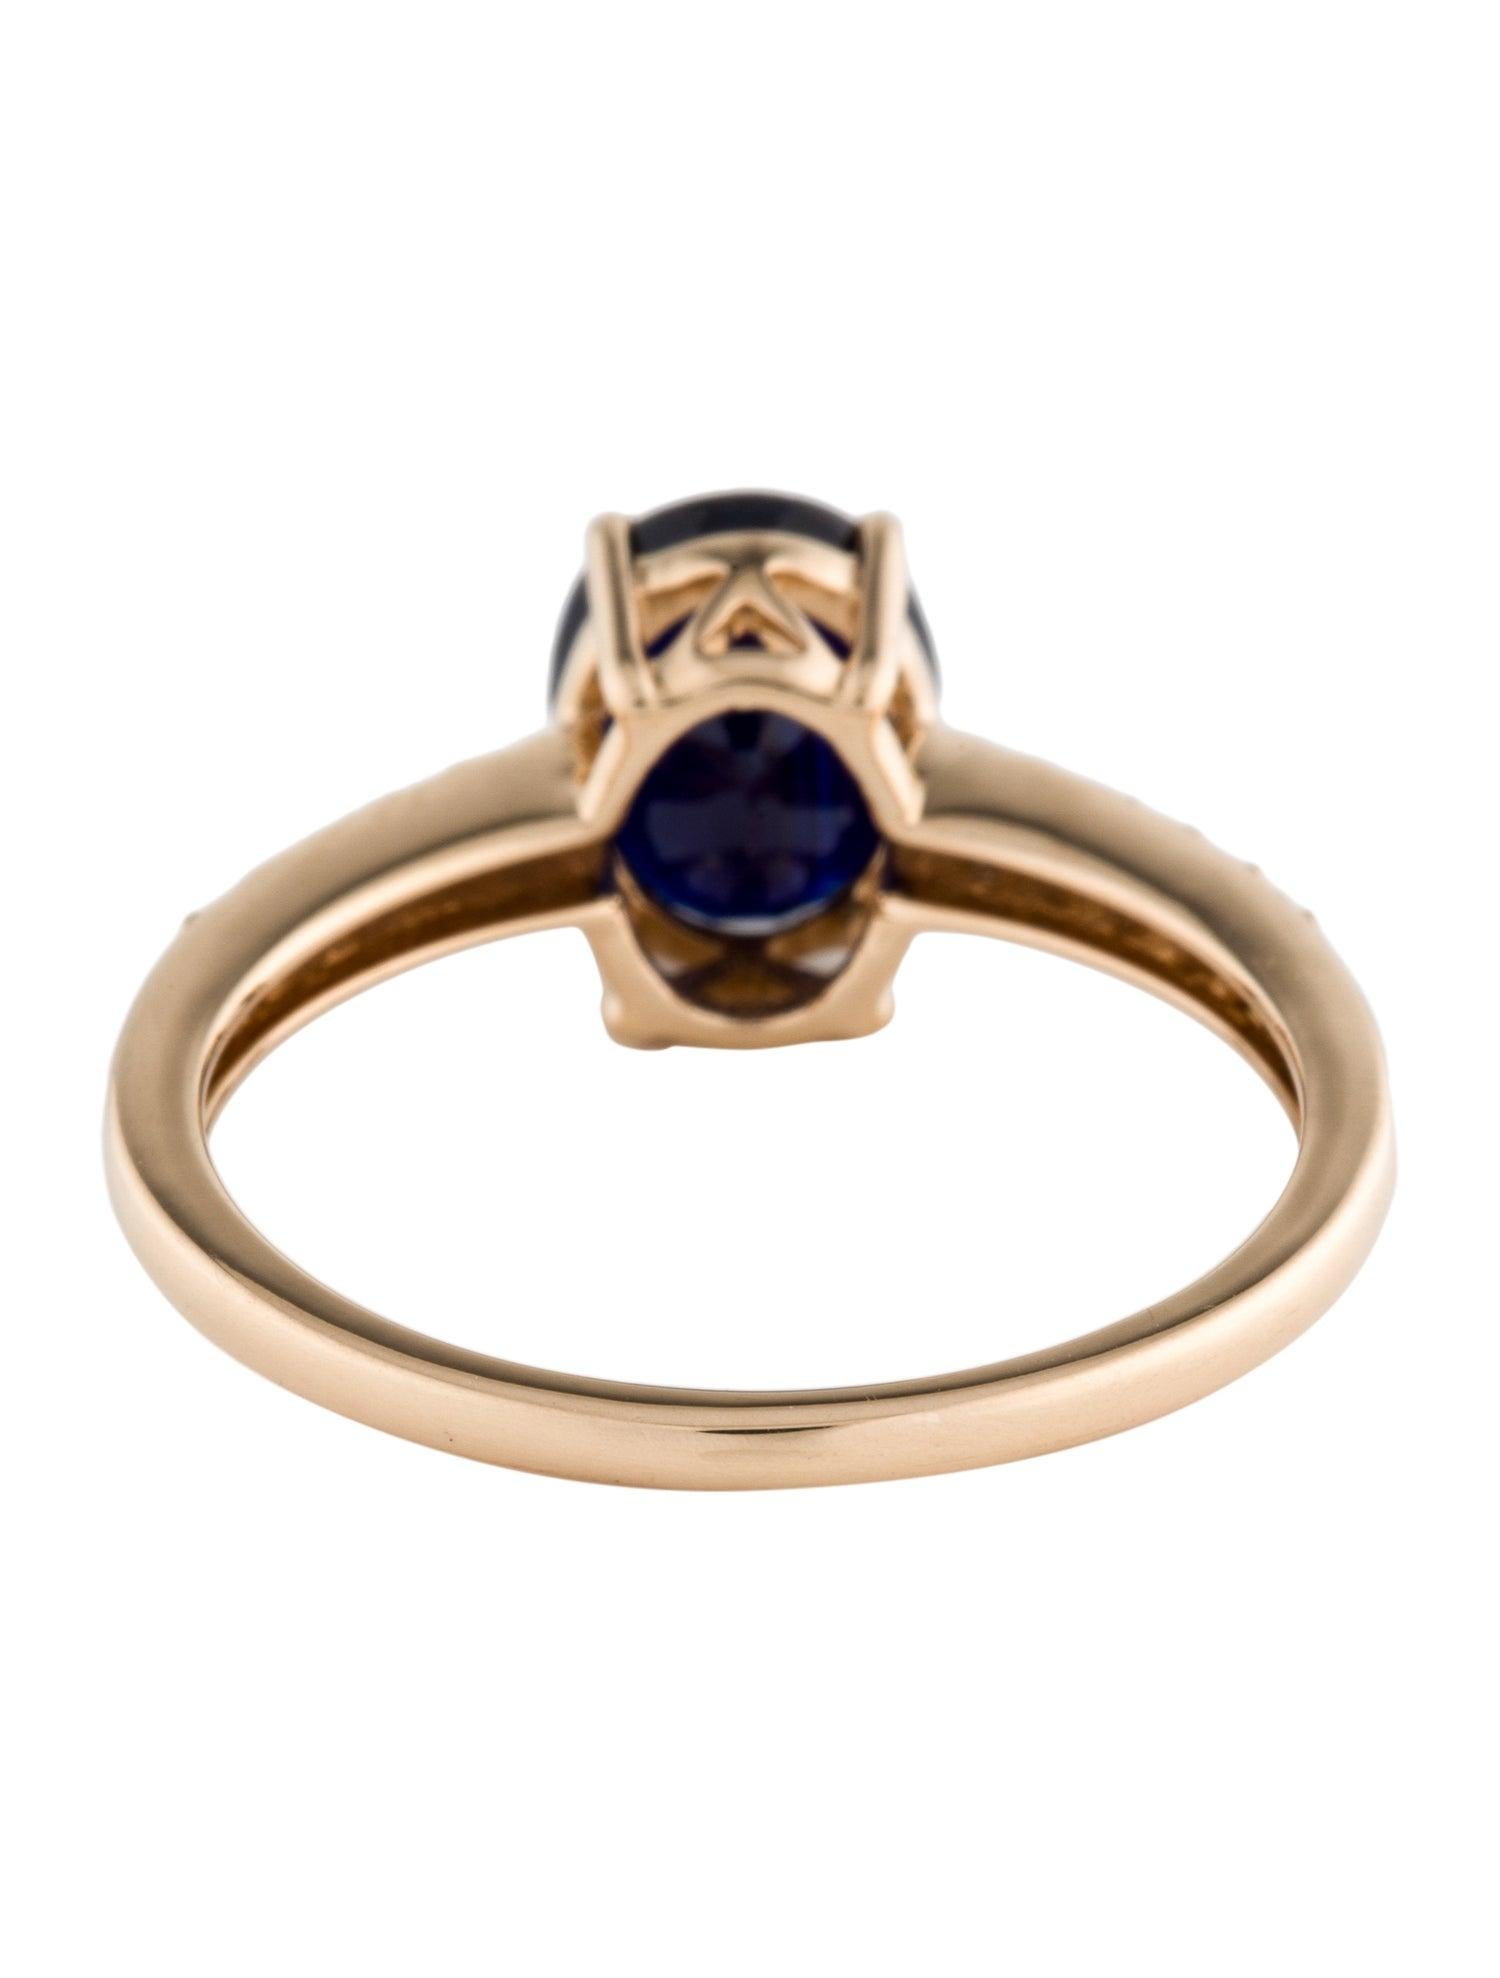 Brilliant Cut Exquisite 14K Gold 2.38ct Sapphire & Diamond Ring Size 8.75 - Statement Jewelry For Sale